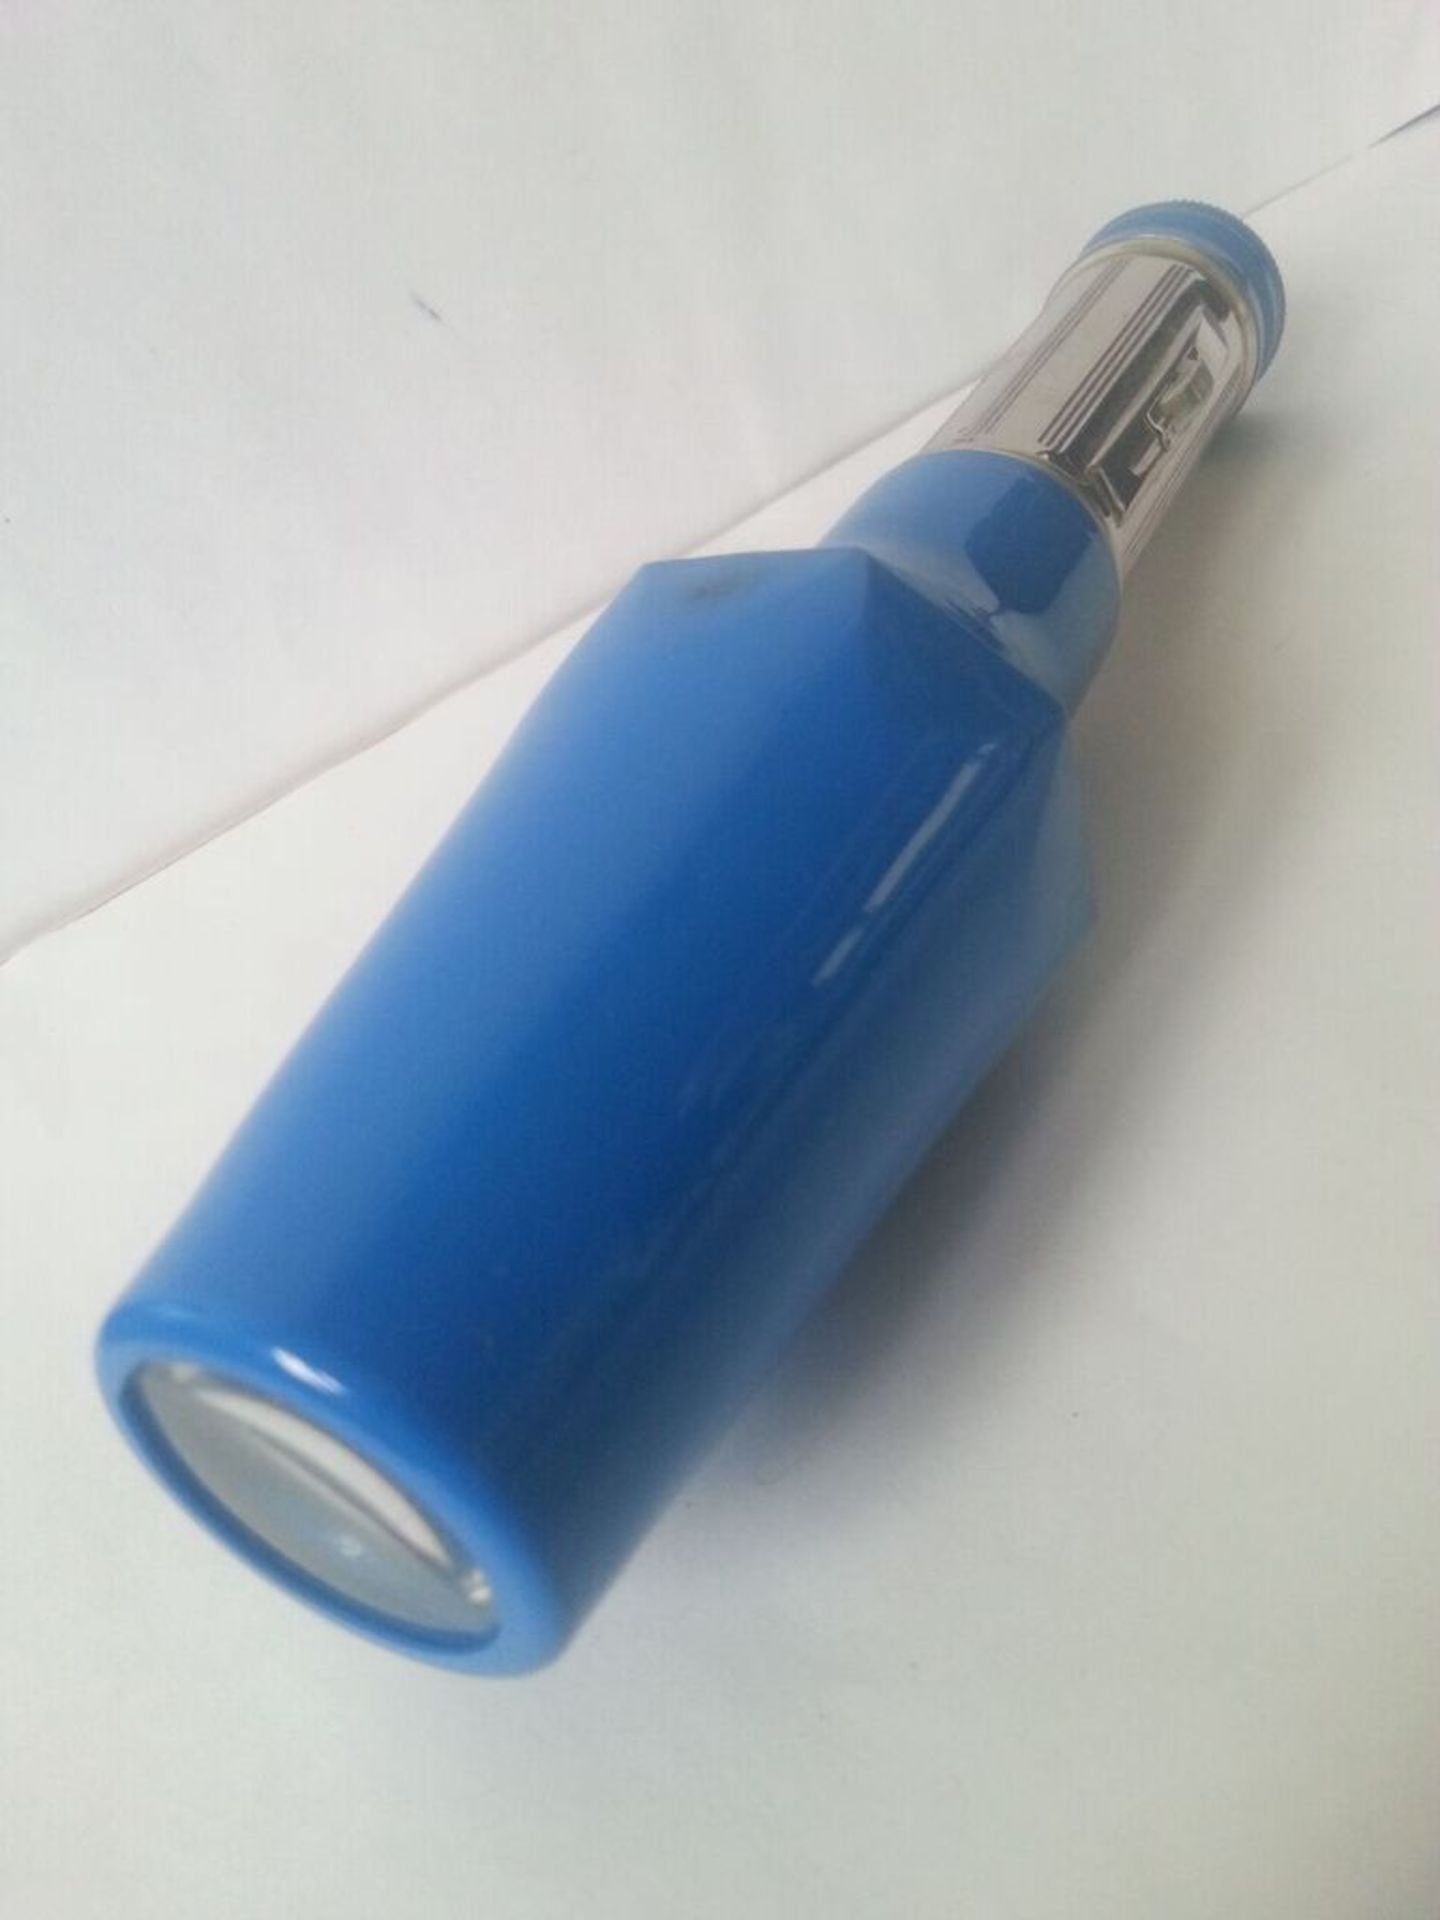 Vintage torch or flashlight, Made in Germany with screw top battery compartment. Probably Artas.